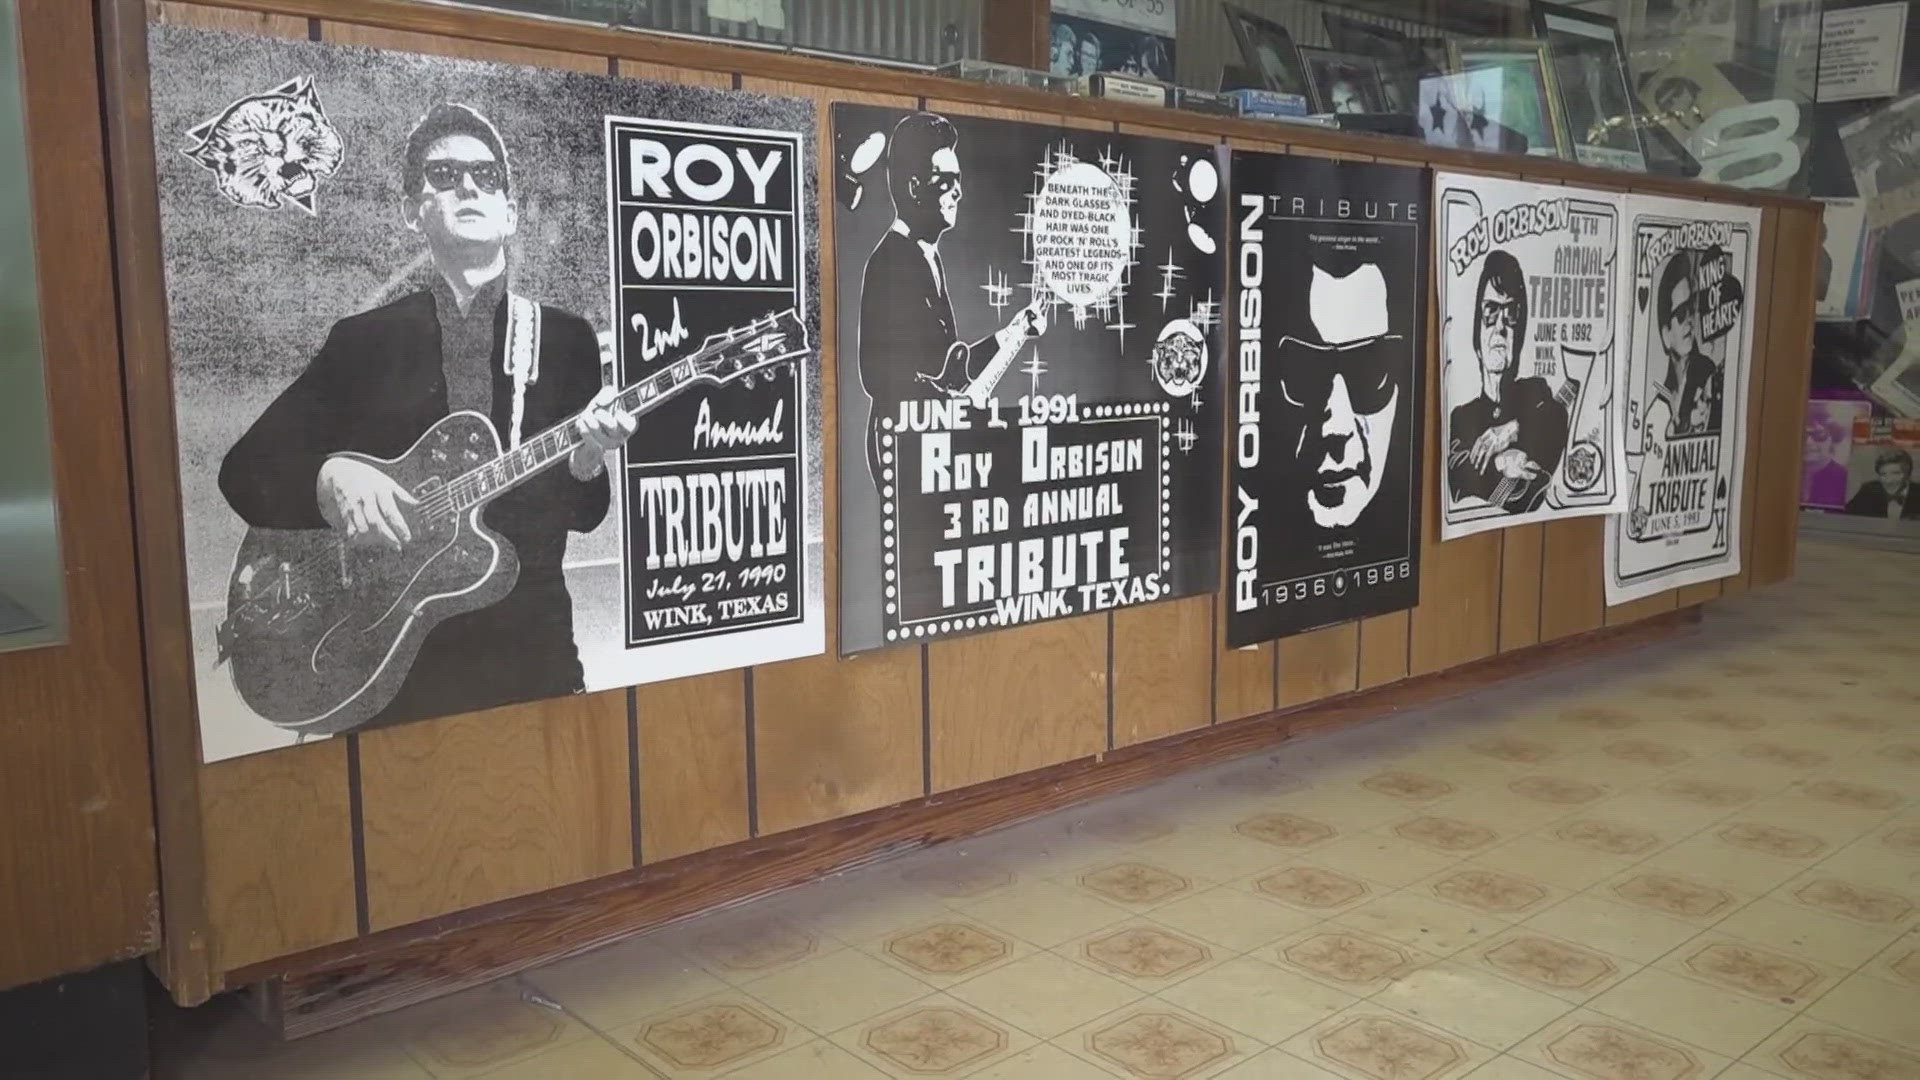 The famous singer-songwriter grew up in Wink, and that's where his music career started. The Roy Orbison Museum honors that career and the life the legend lived.